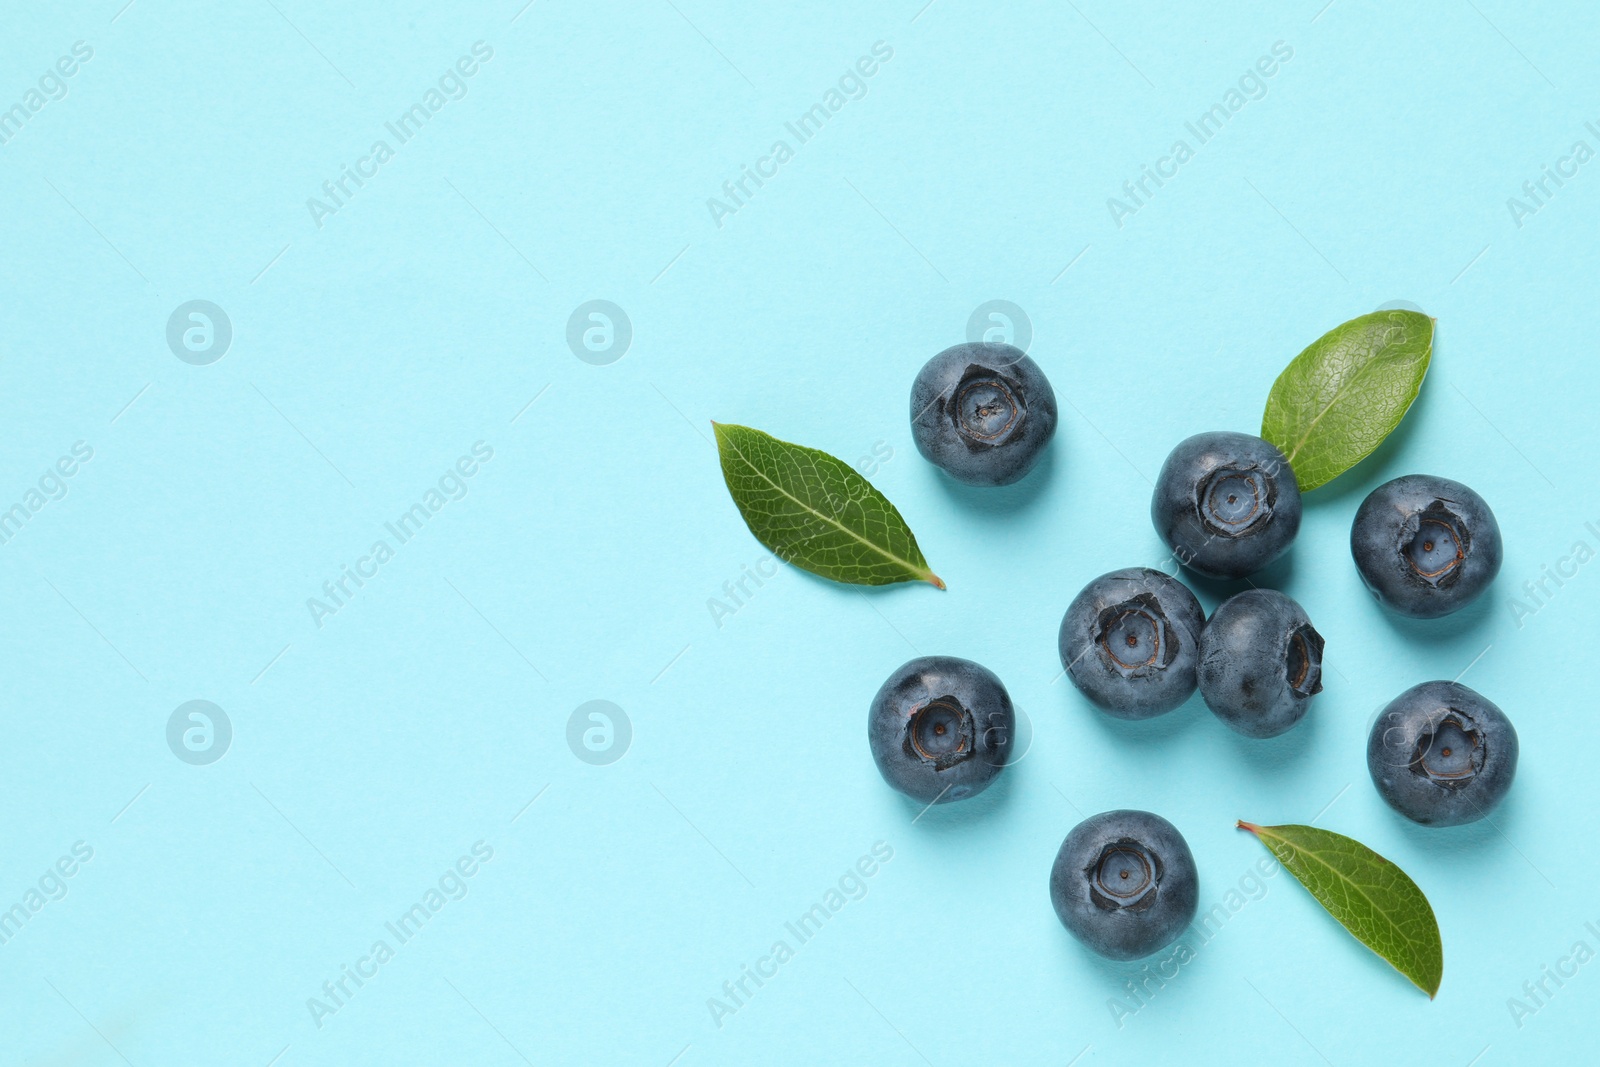 Photo of Tasty fresh blueberries with green leaves on light blue background, flat lay. Space for text